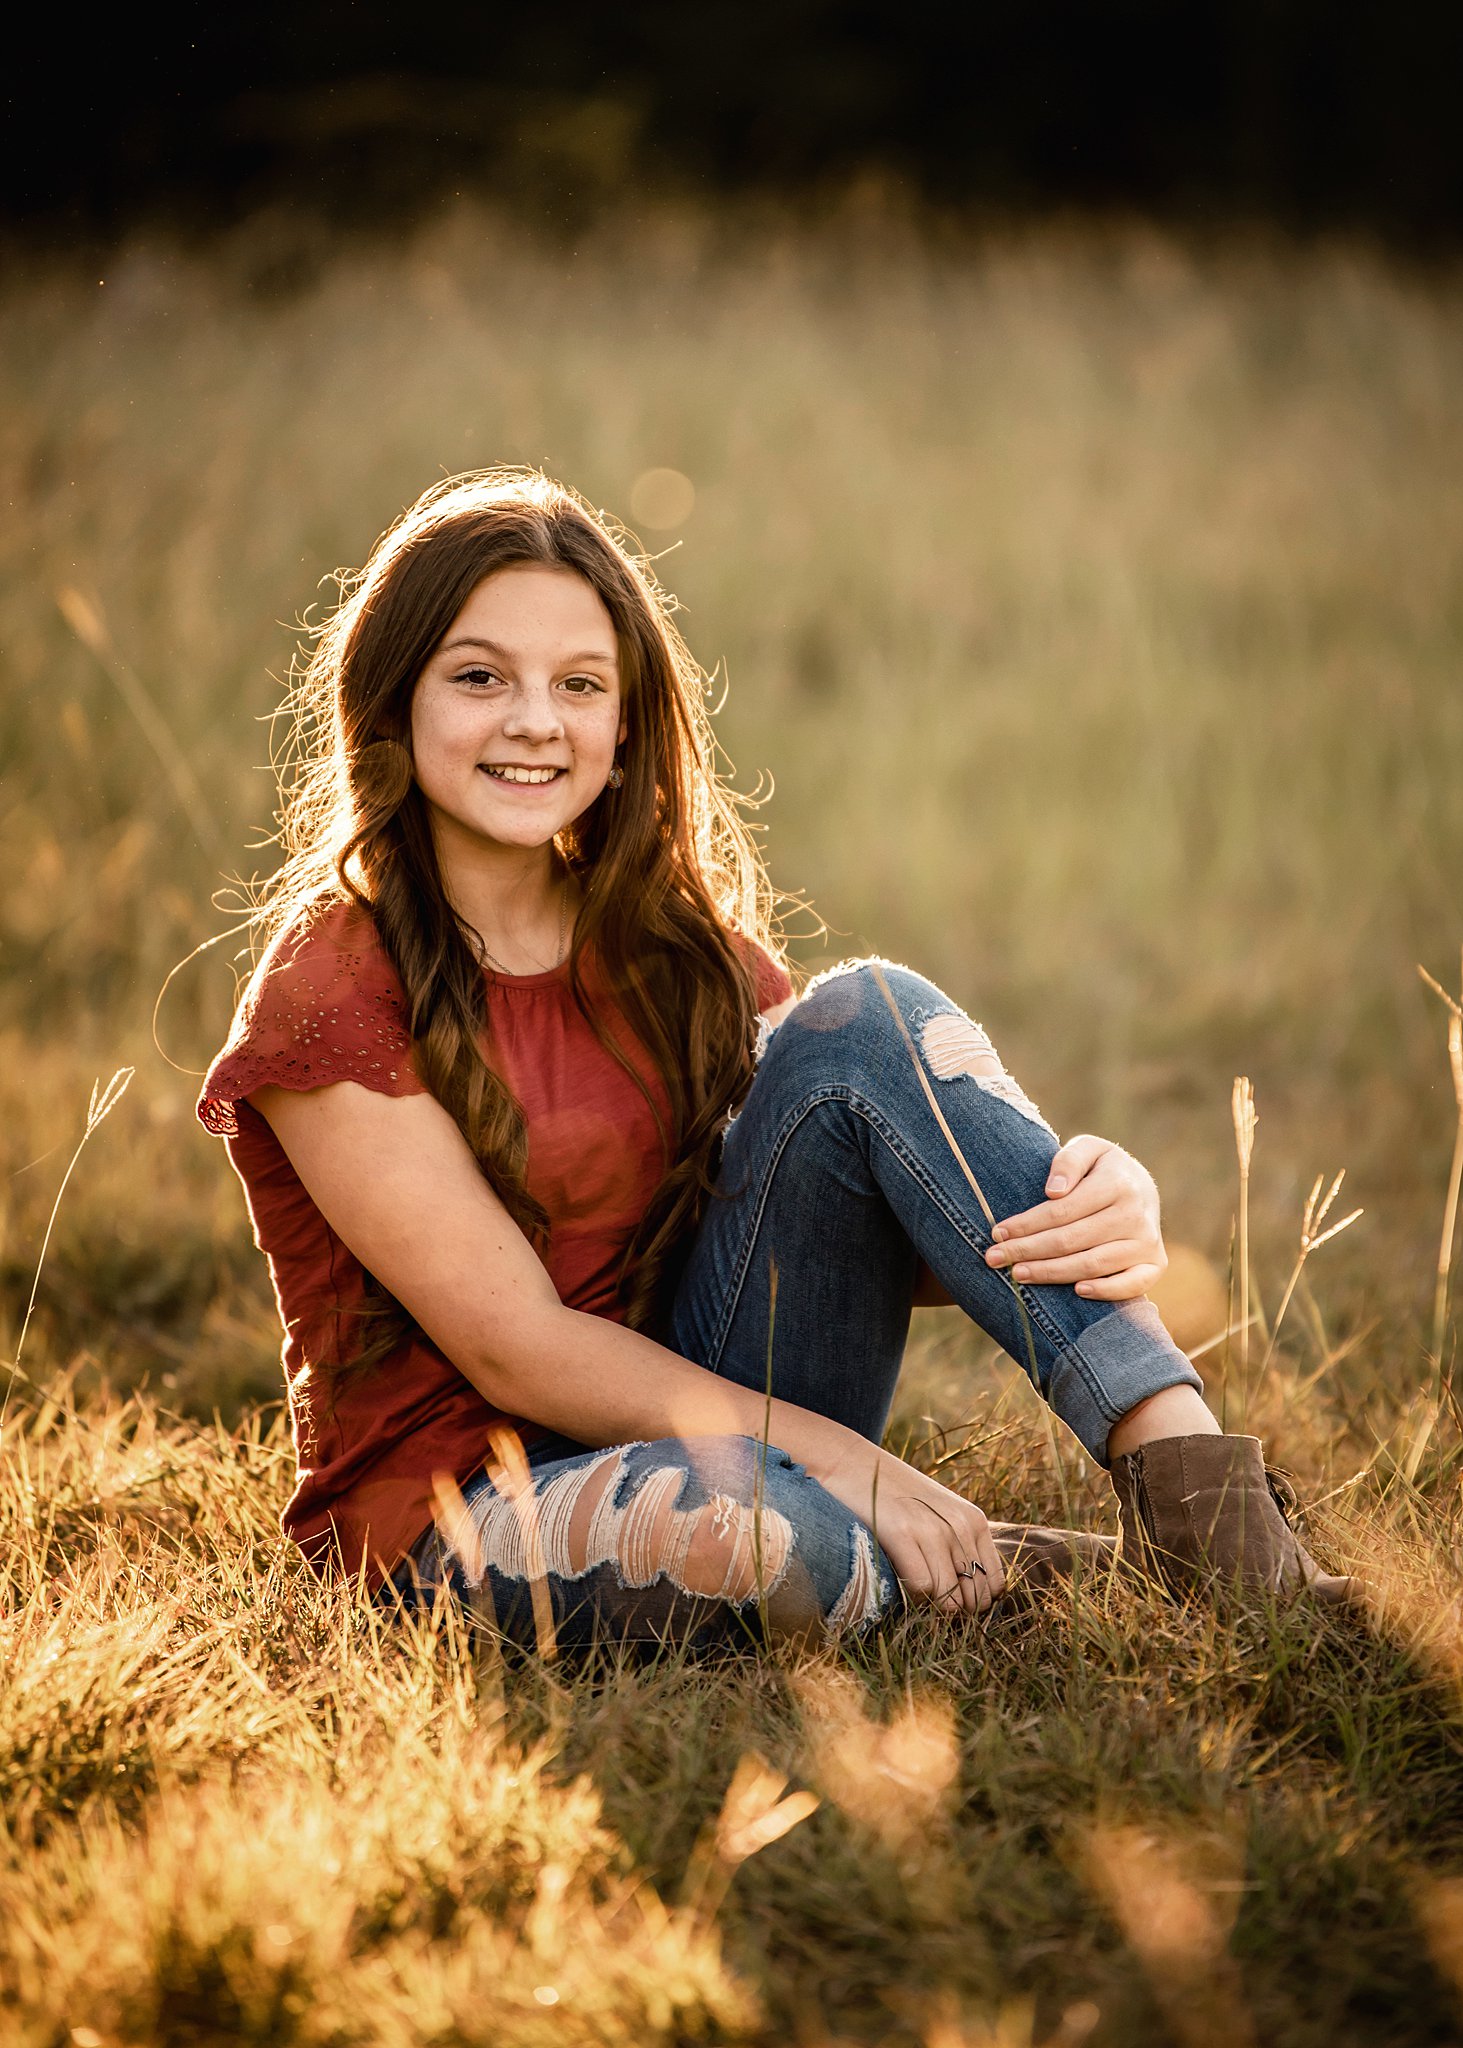 A young girl sits in a field at sunset in jeans and a red shirt after attending a waco montessori school